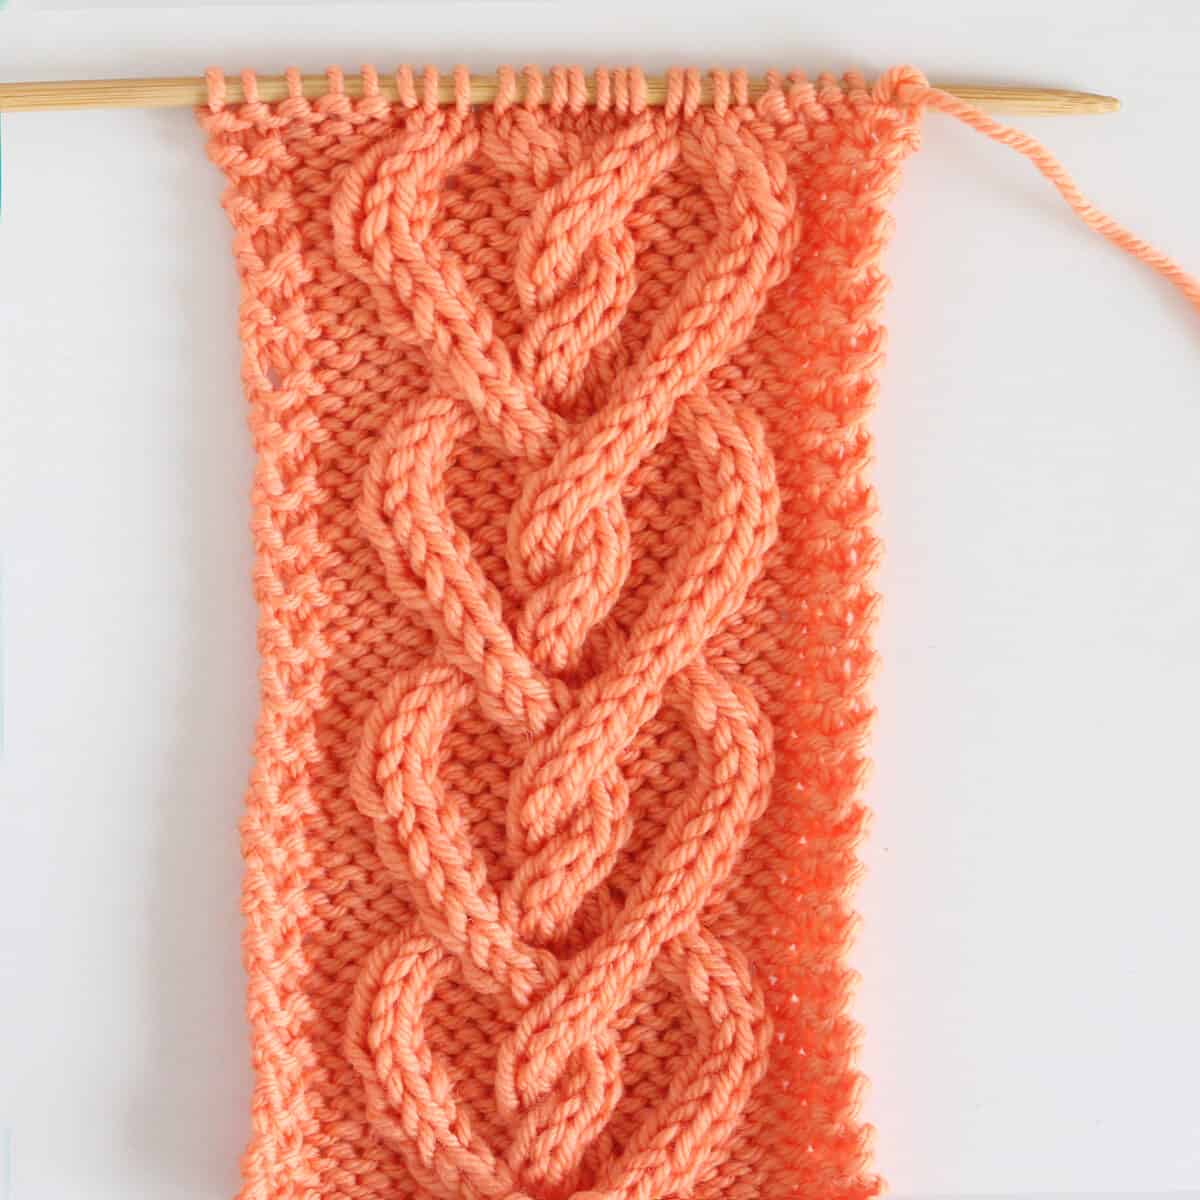 Cable Hearts knitted in orange color yarn on needle.